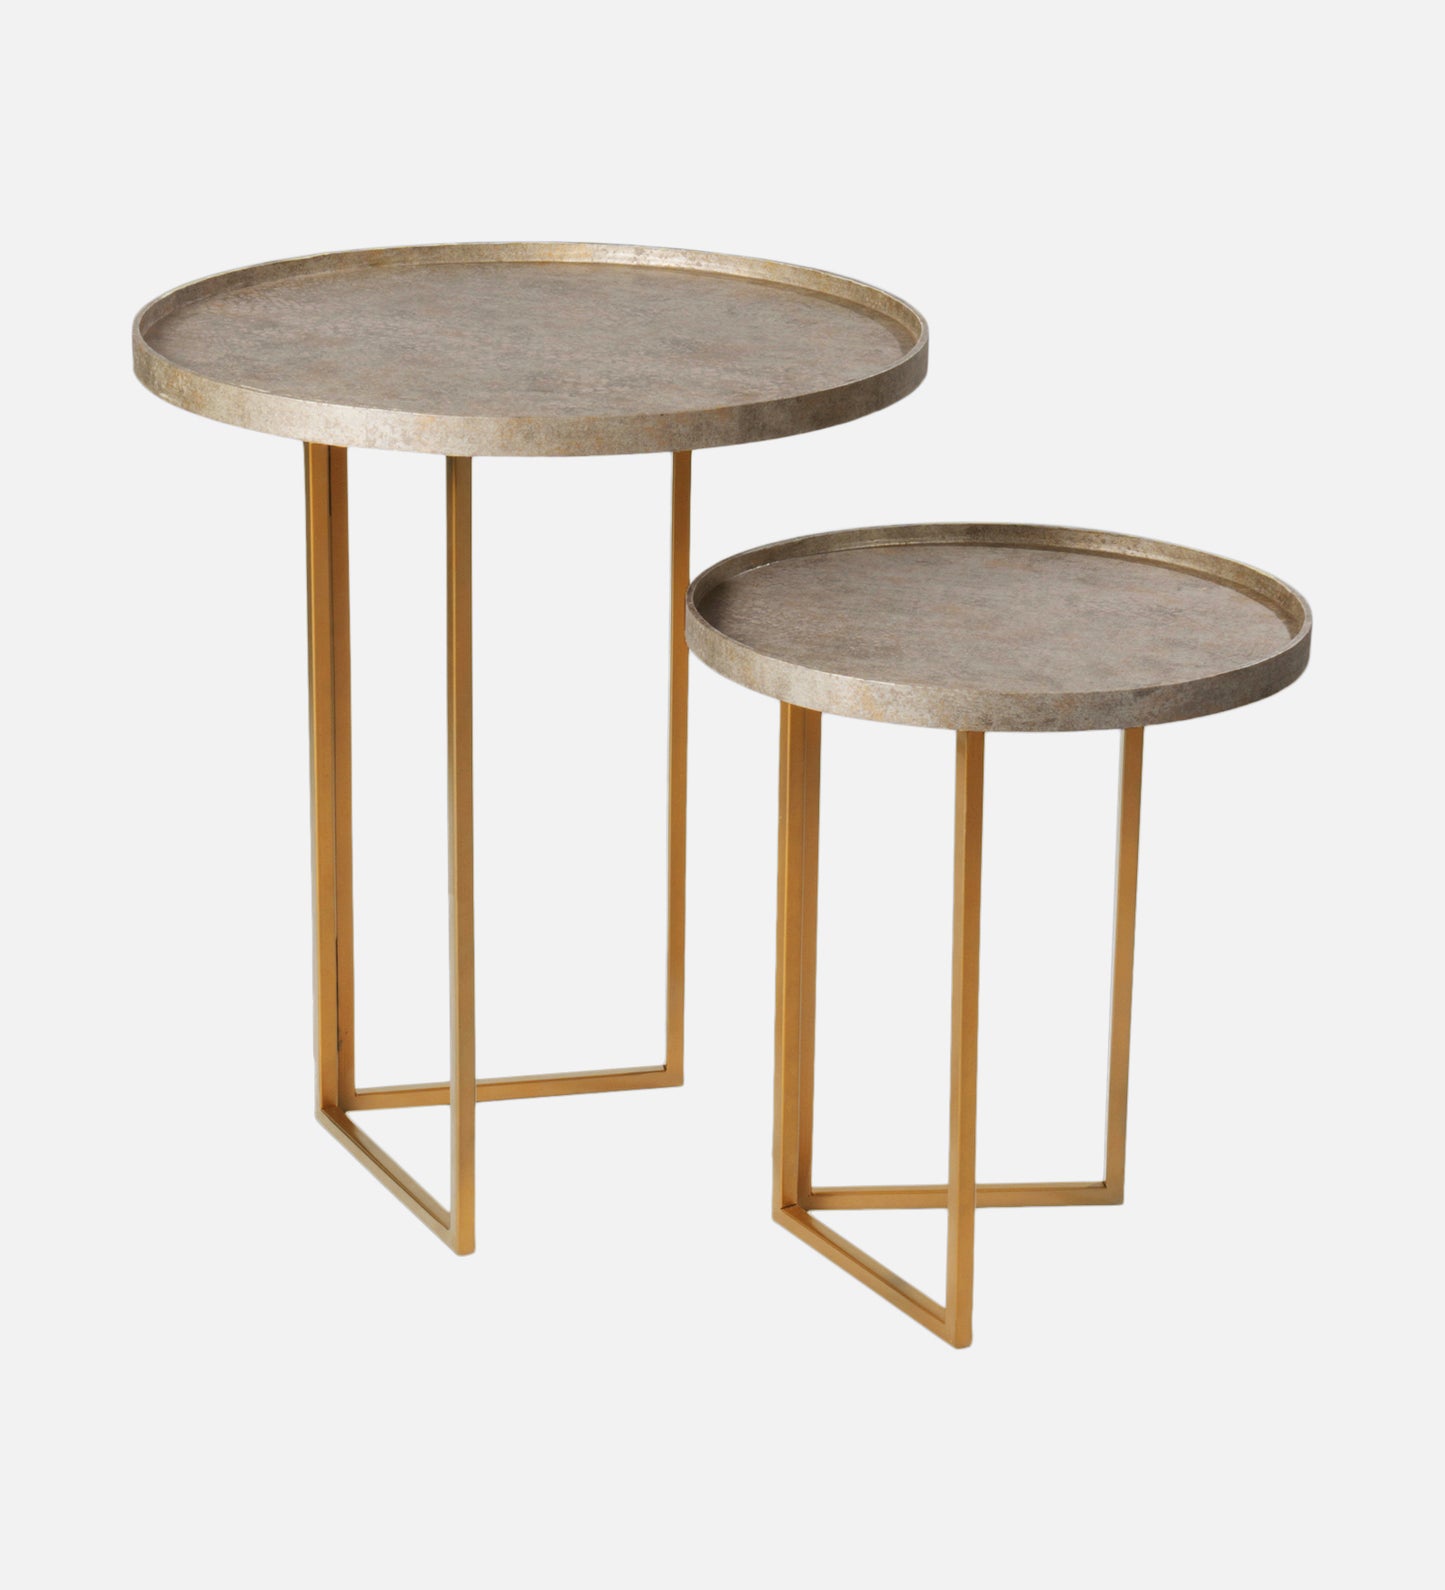 Transcendent Tinge Dark Gold Round Oblique Nesting Tables, Side Tables, Wooden Tables, Living Room Decor by A Tiny Mistake